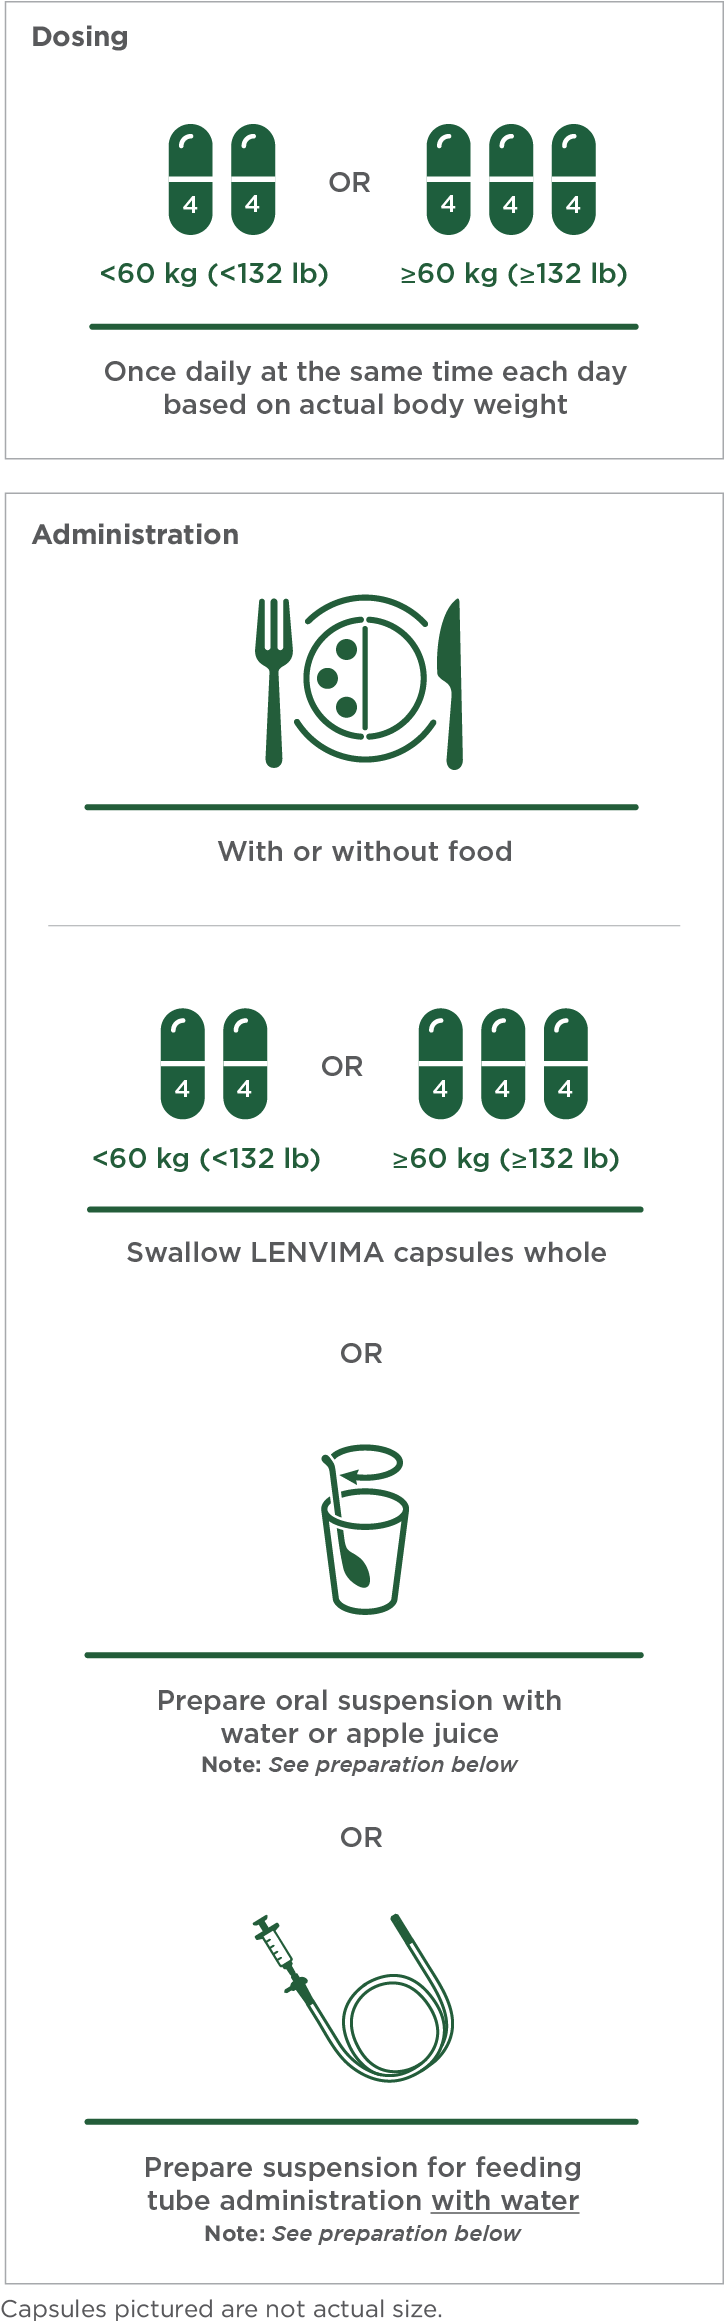 LENVIMA dosing is once a day, every day, with or without food, and is based on body weight graphic mobile